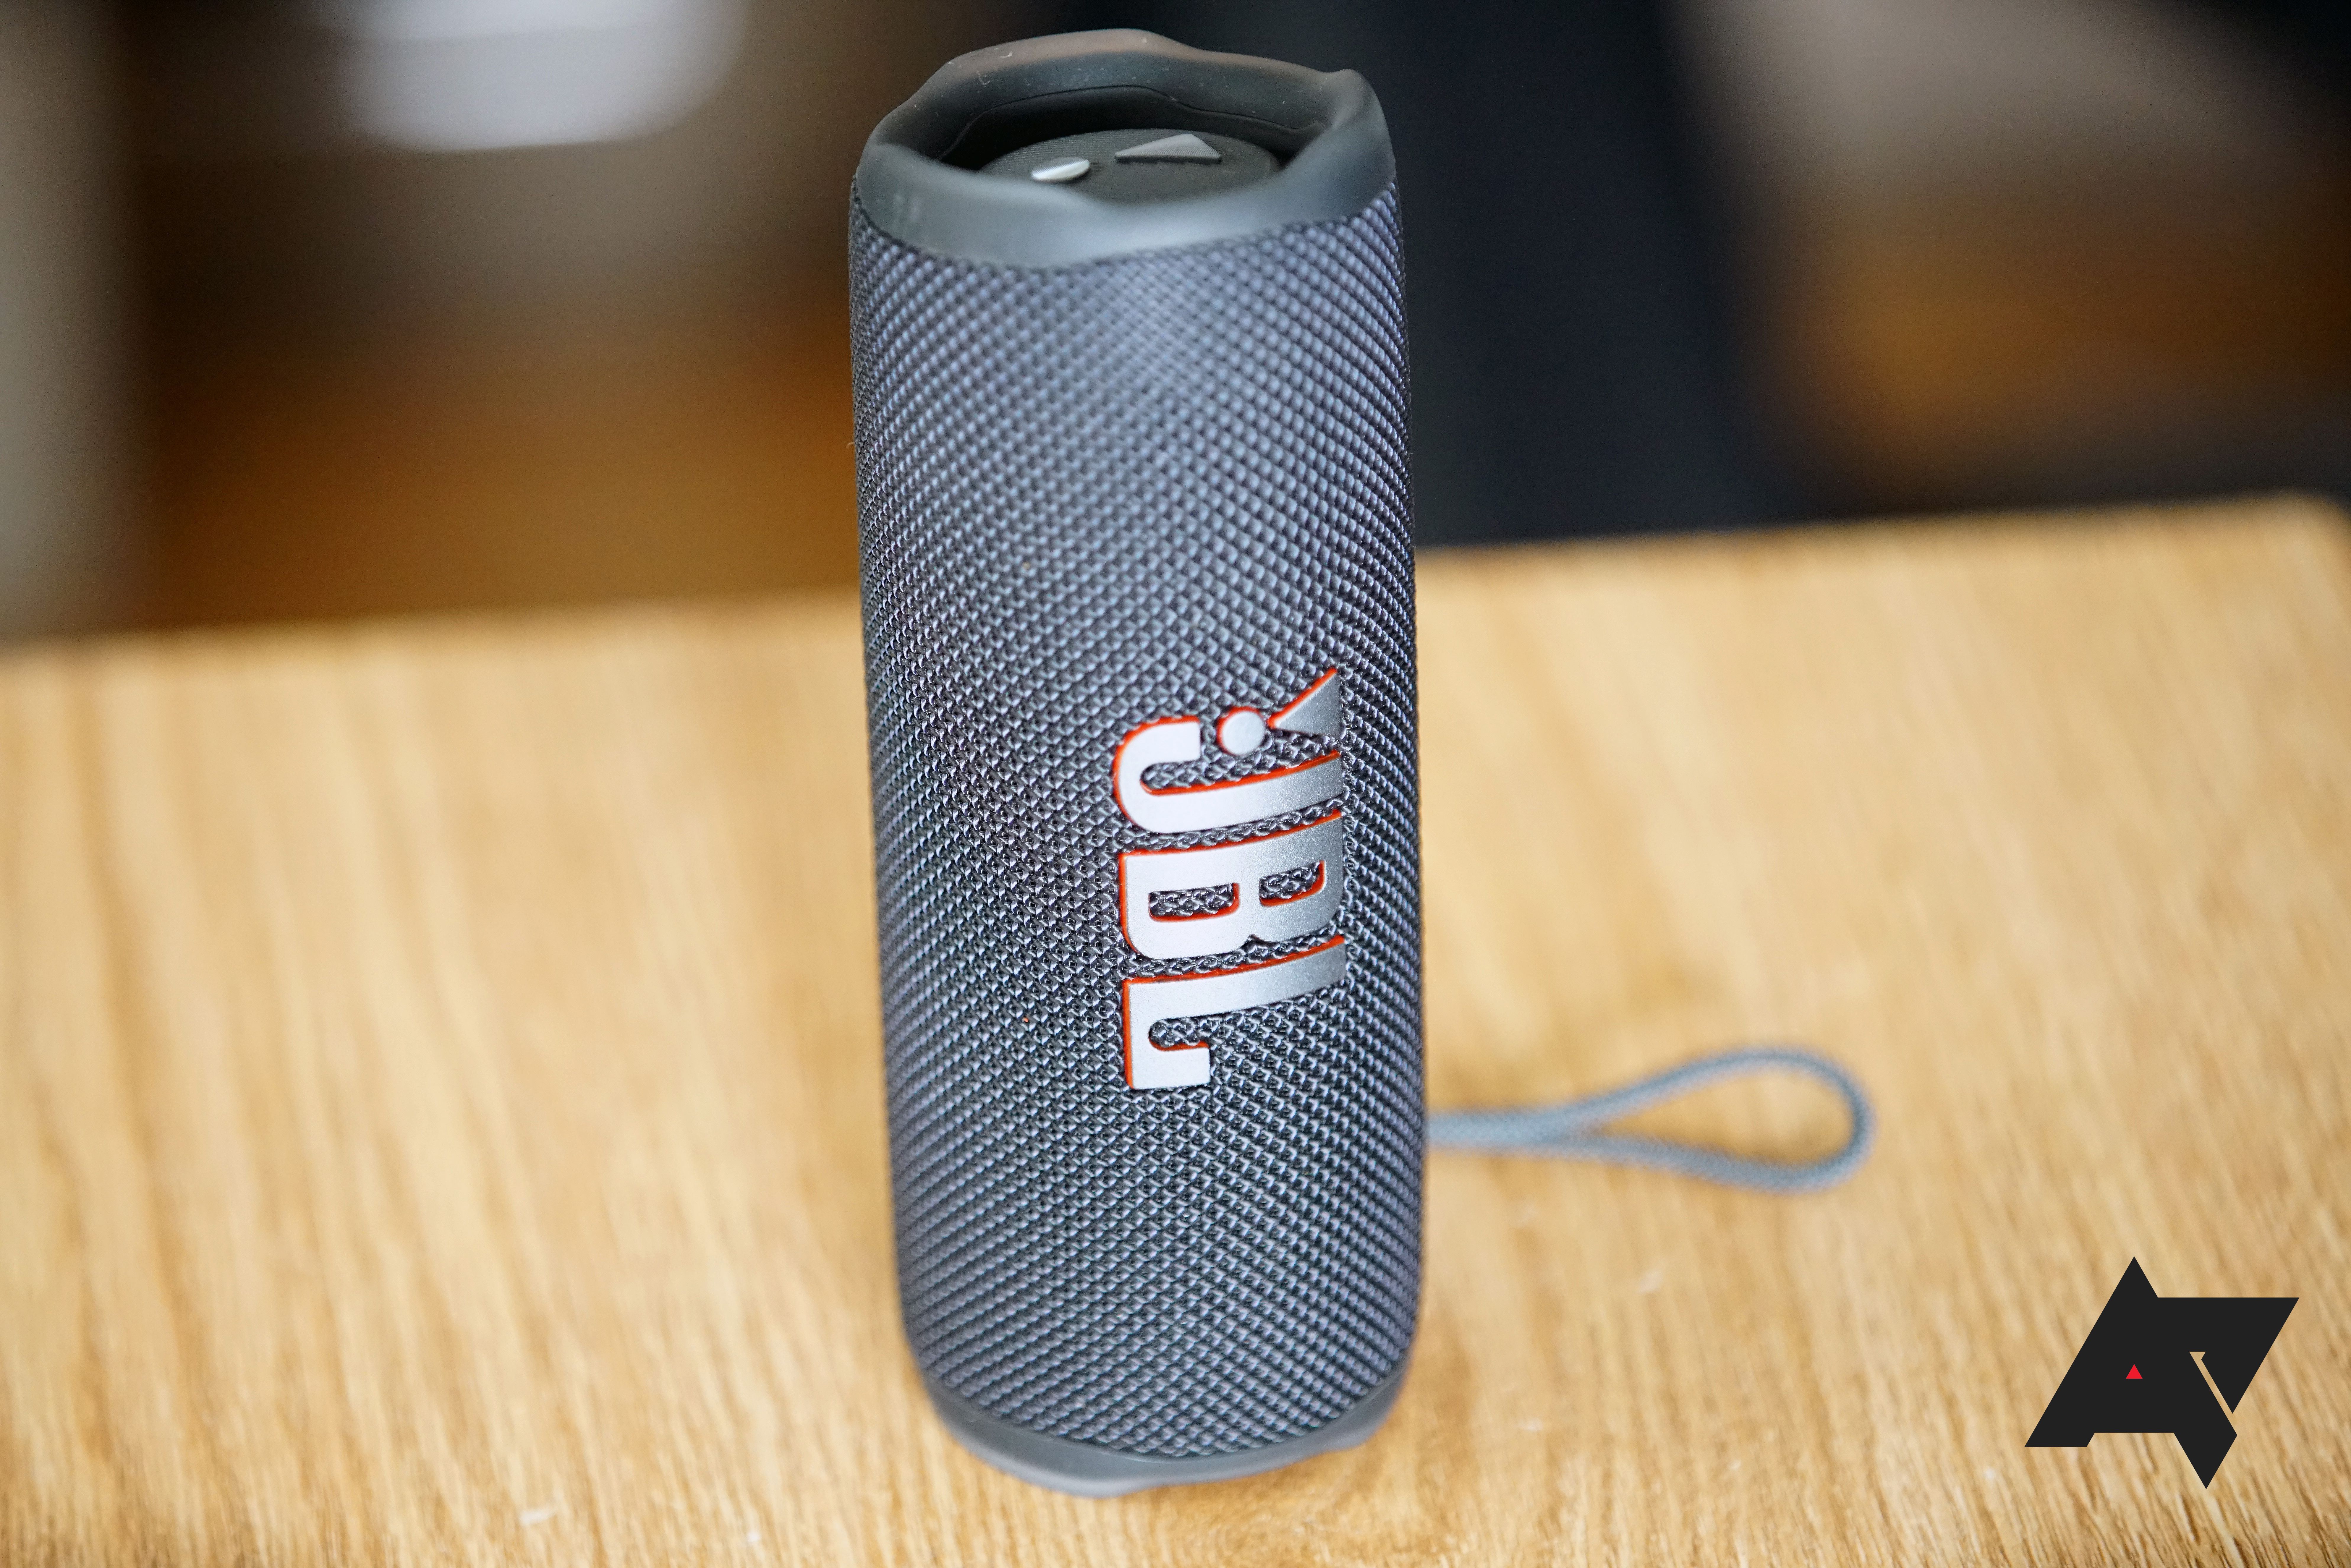 JBL Flip 6 review: Full specs, features & sound quality